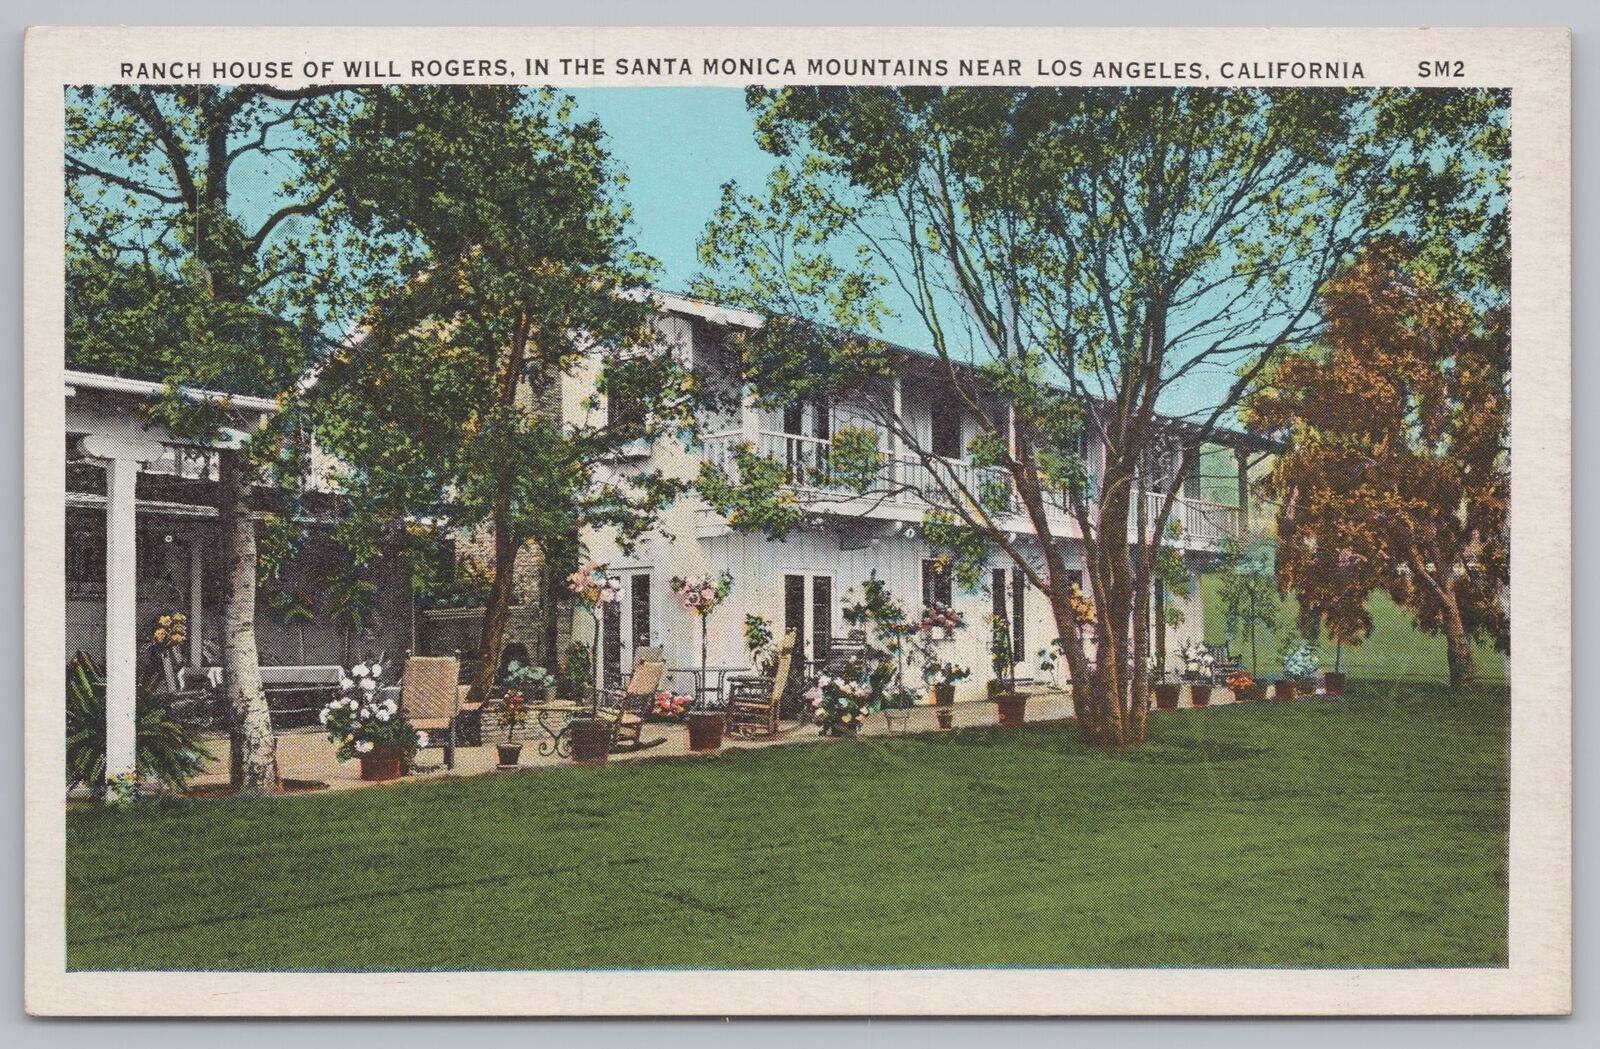 Los Angeles CA~Ranch House of Will Rogers Santa Monica Mts~Vintage Postcard